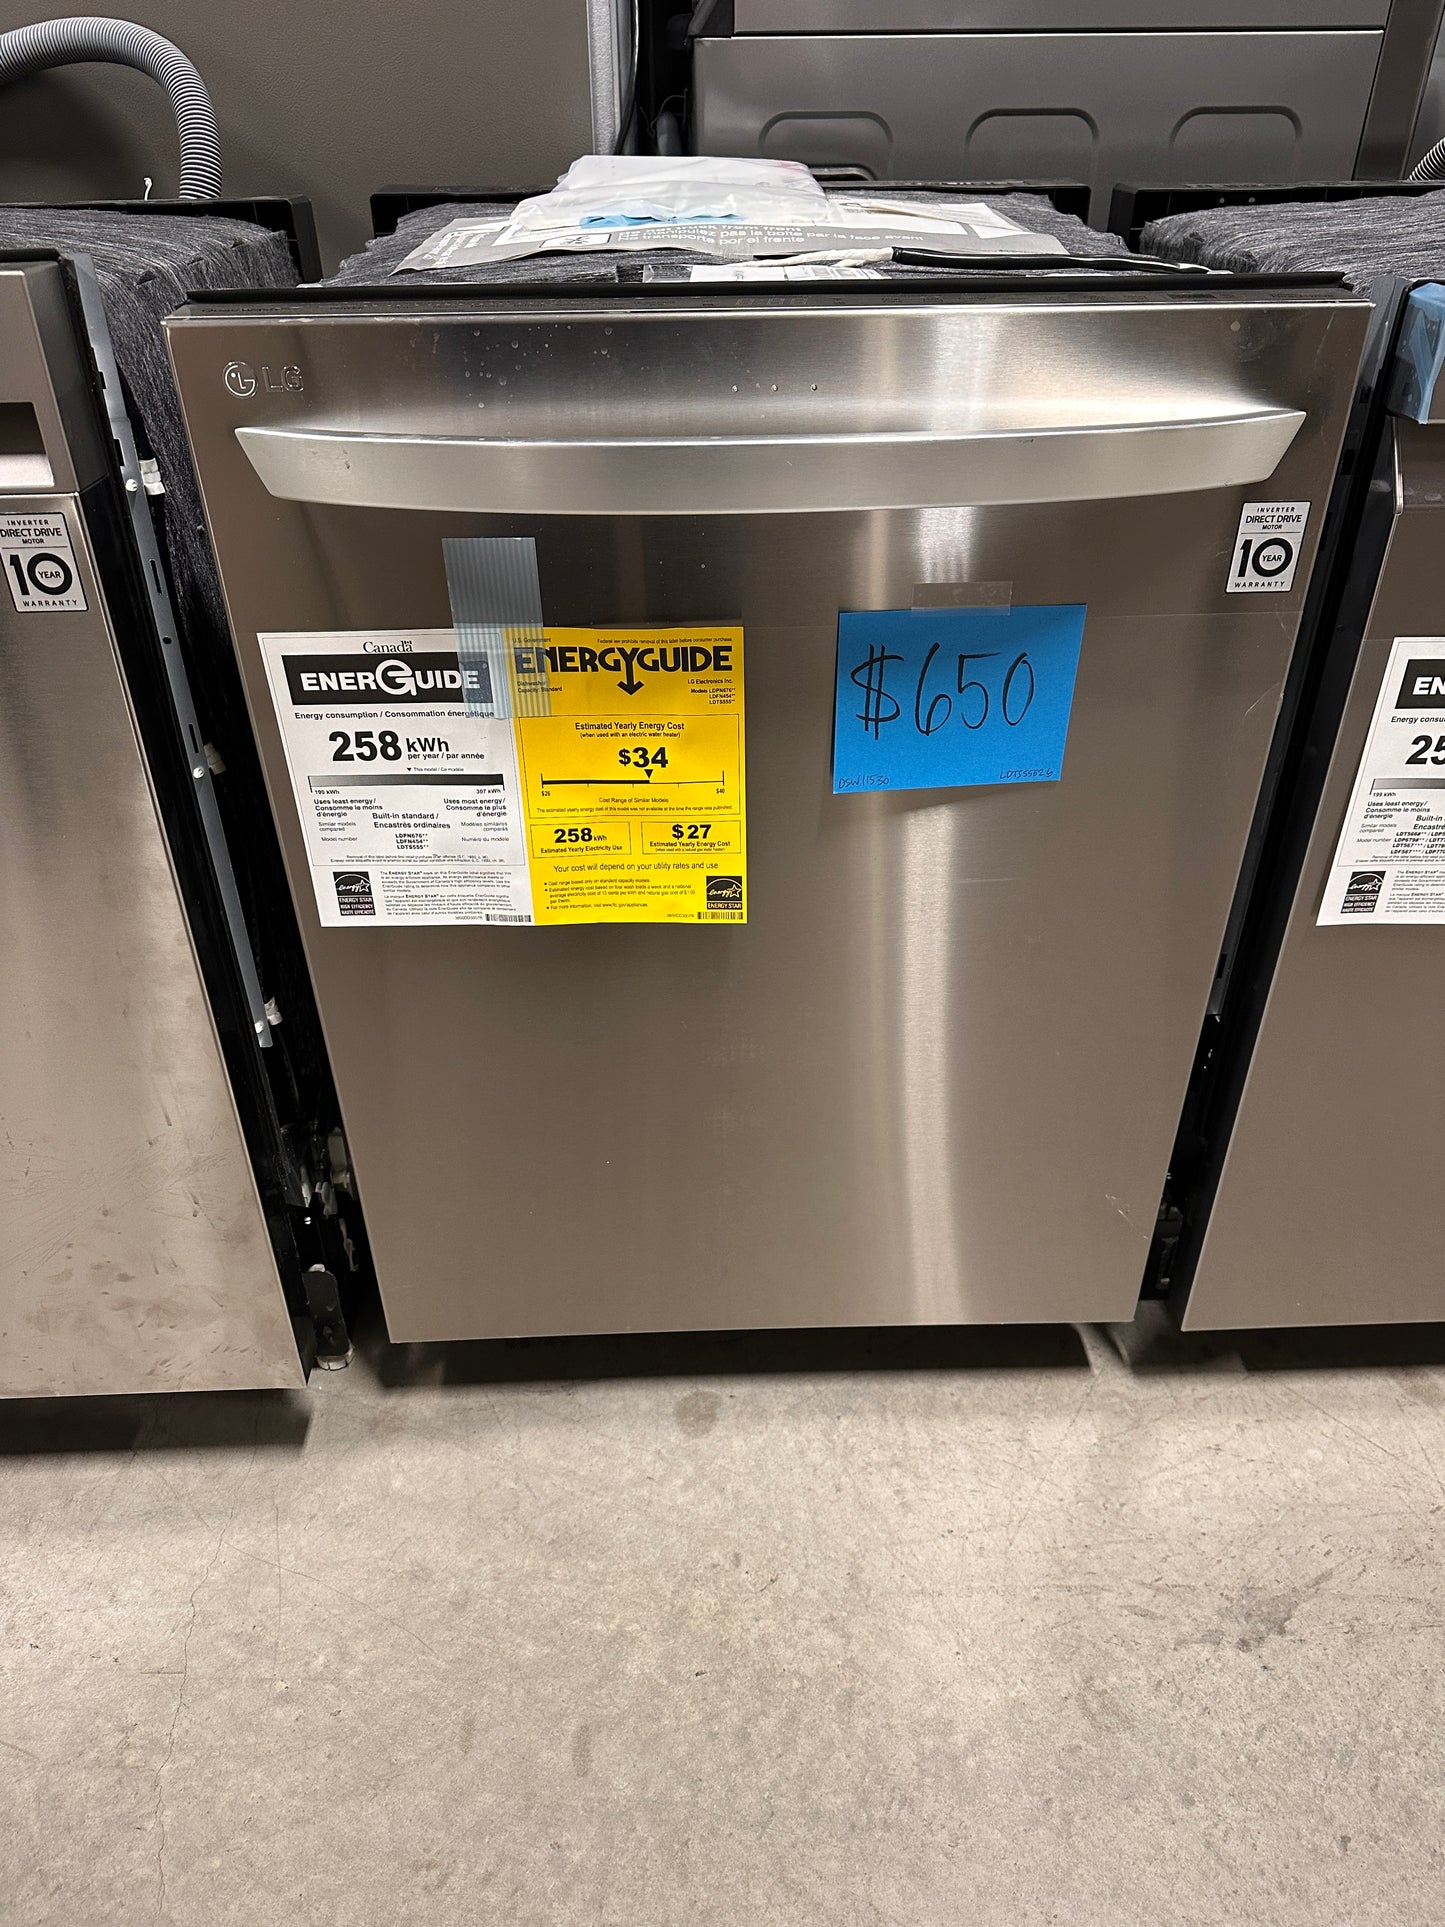 NEW TOP CONTROL LG DISHWASHER with 3RD RACK - DSW11530